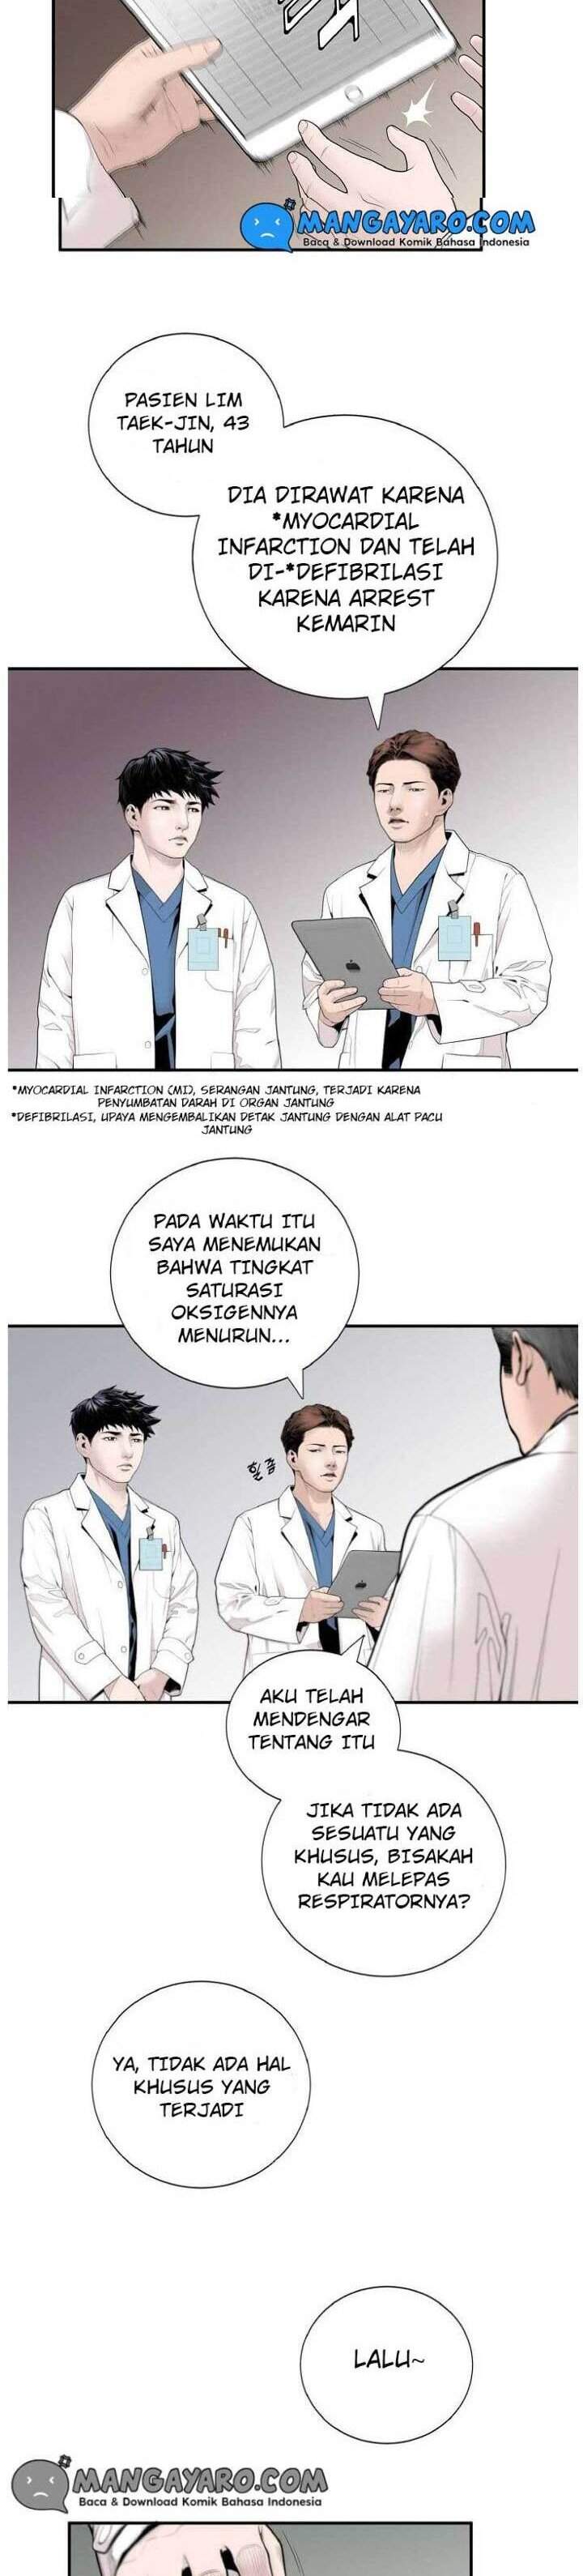 Dr. Choi Tae-soo Chapter 6